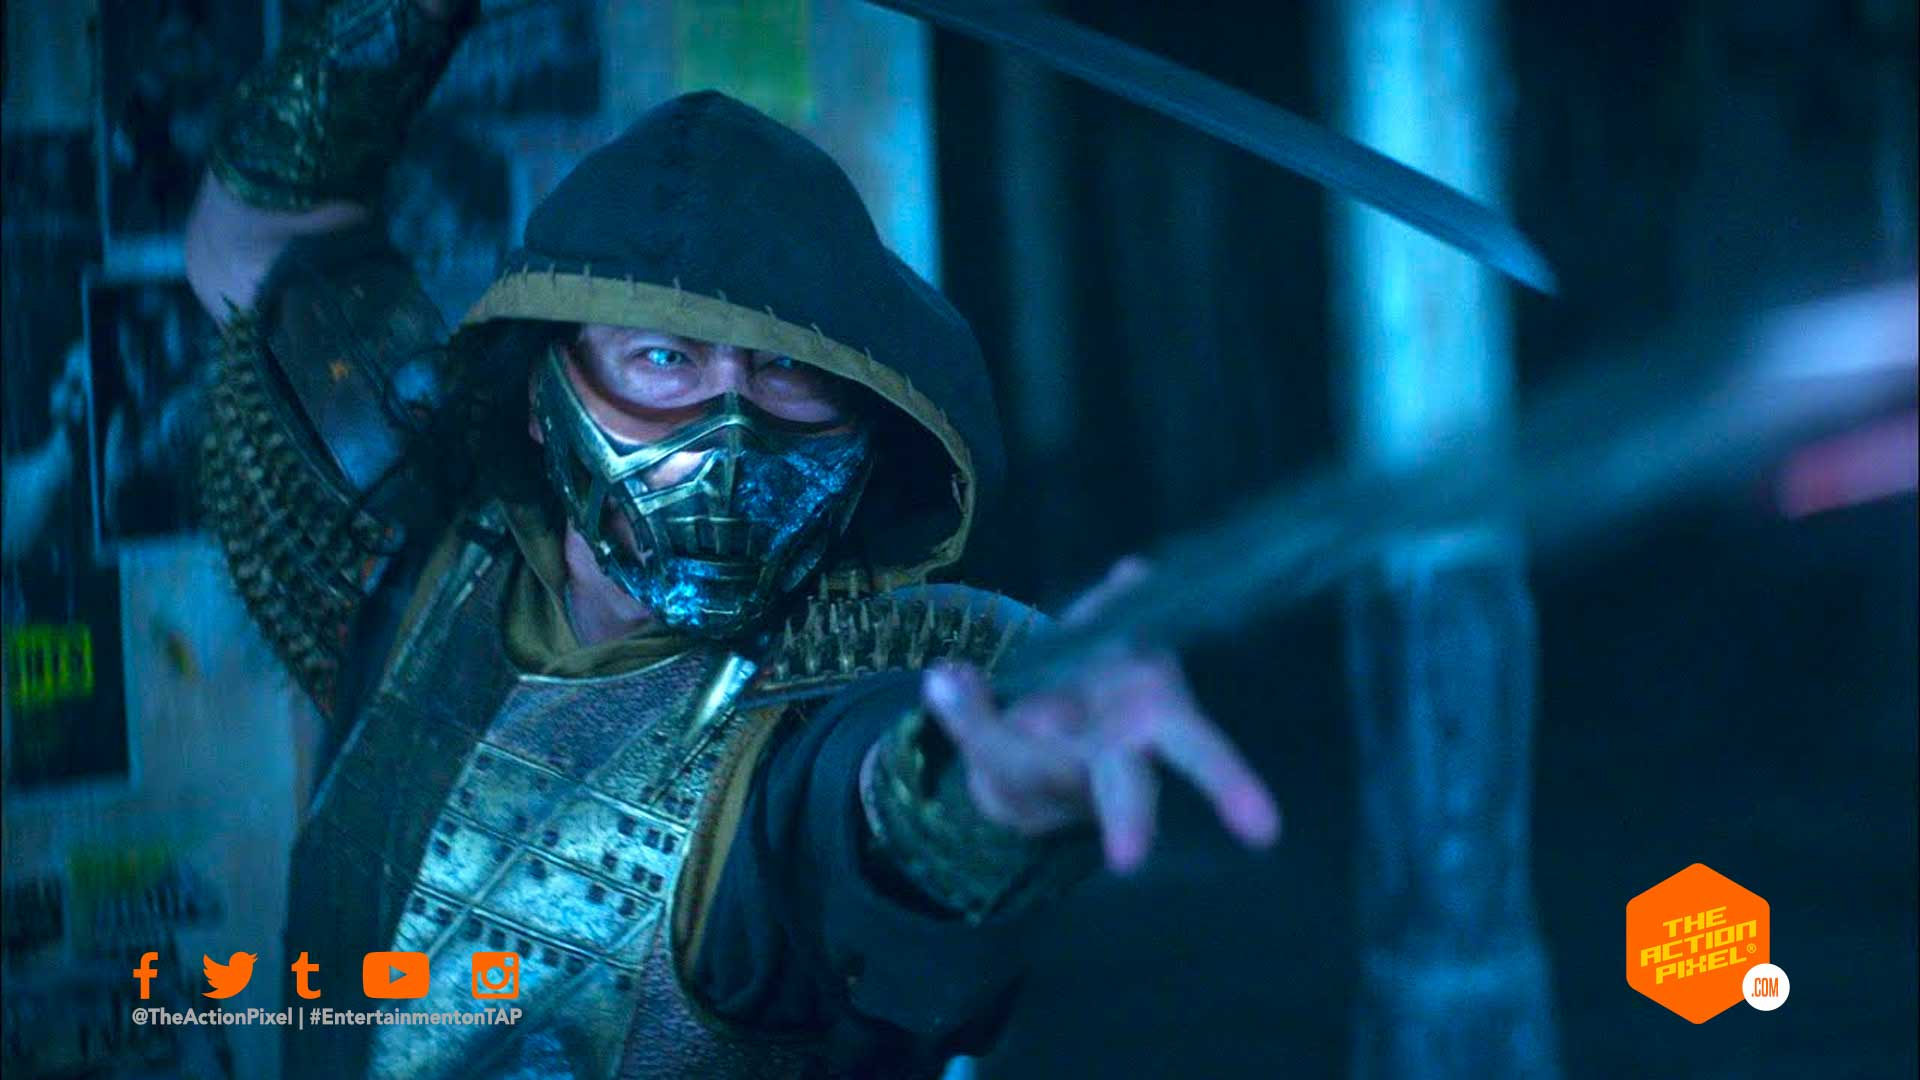 Mortal Kombat” Goes Cold Blooded For Their Red Band Movie Trailer